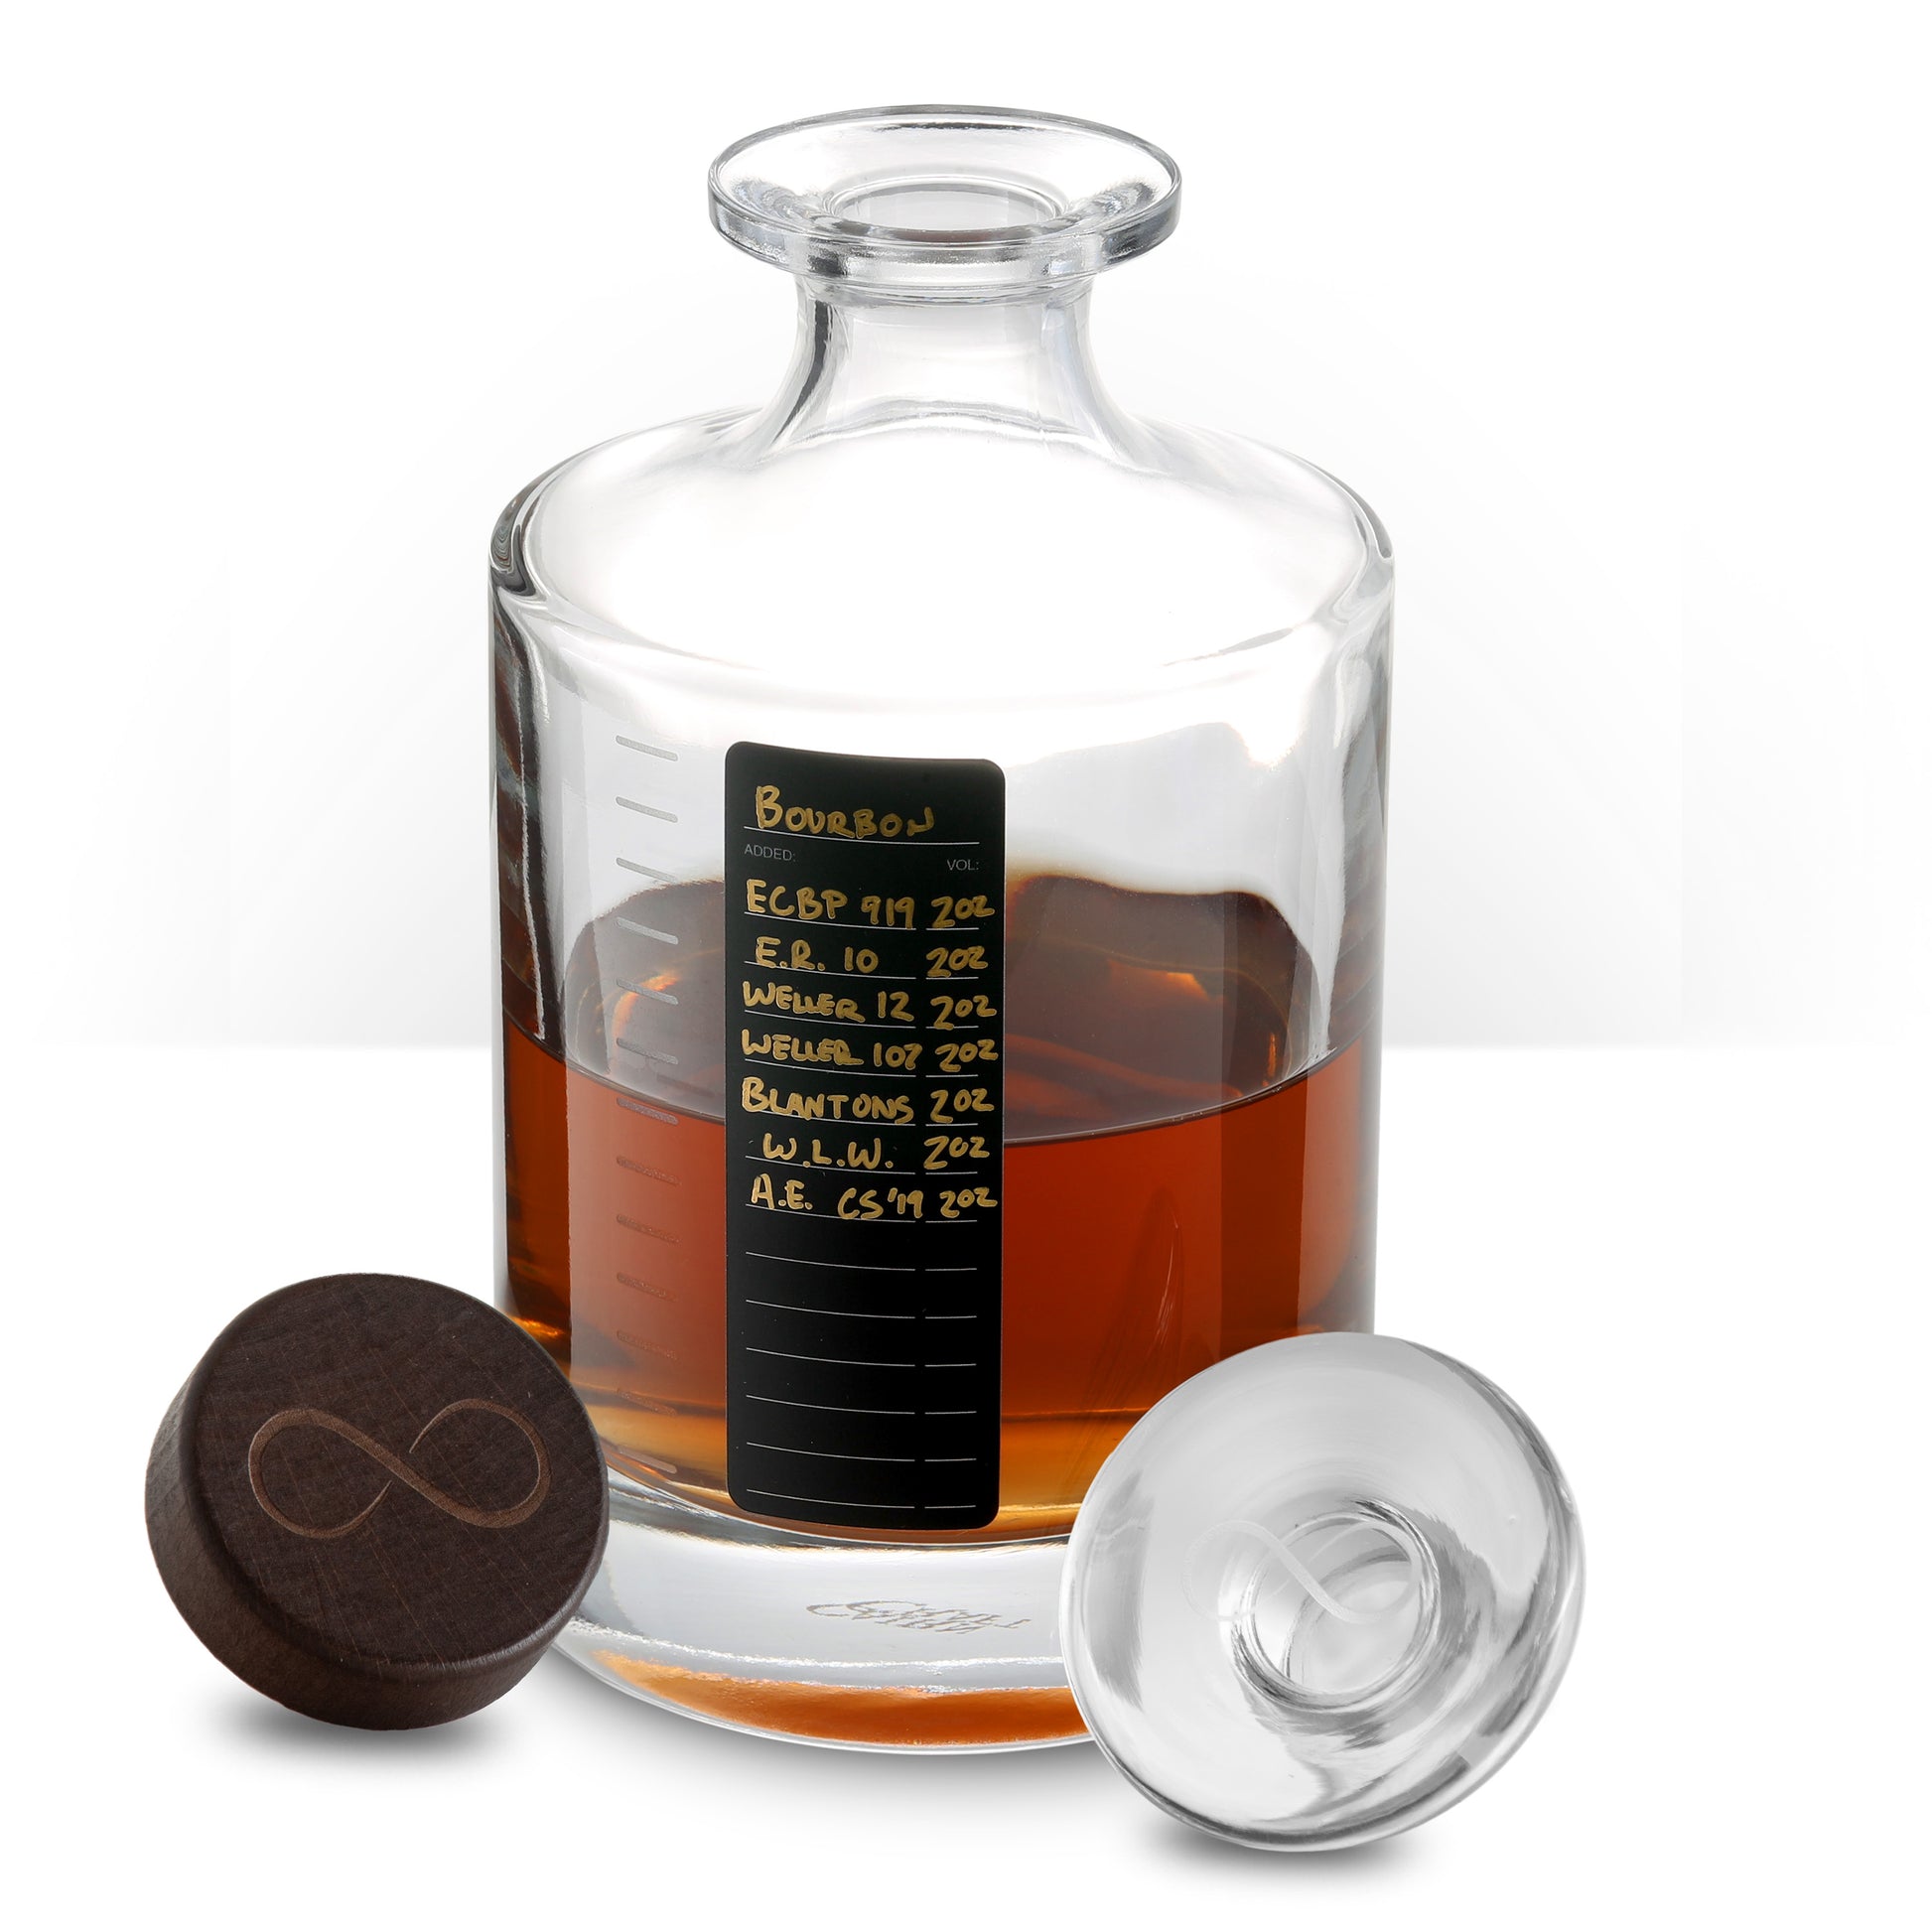 Whiskey Infinity Decanter - Cairn Craft Glass Whisky & Liquor Bottle and Stopper